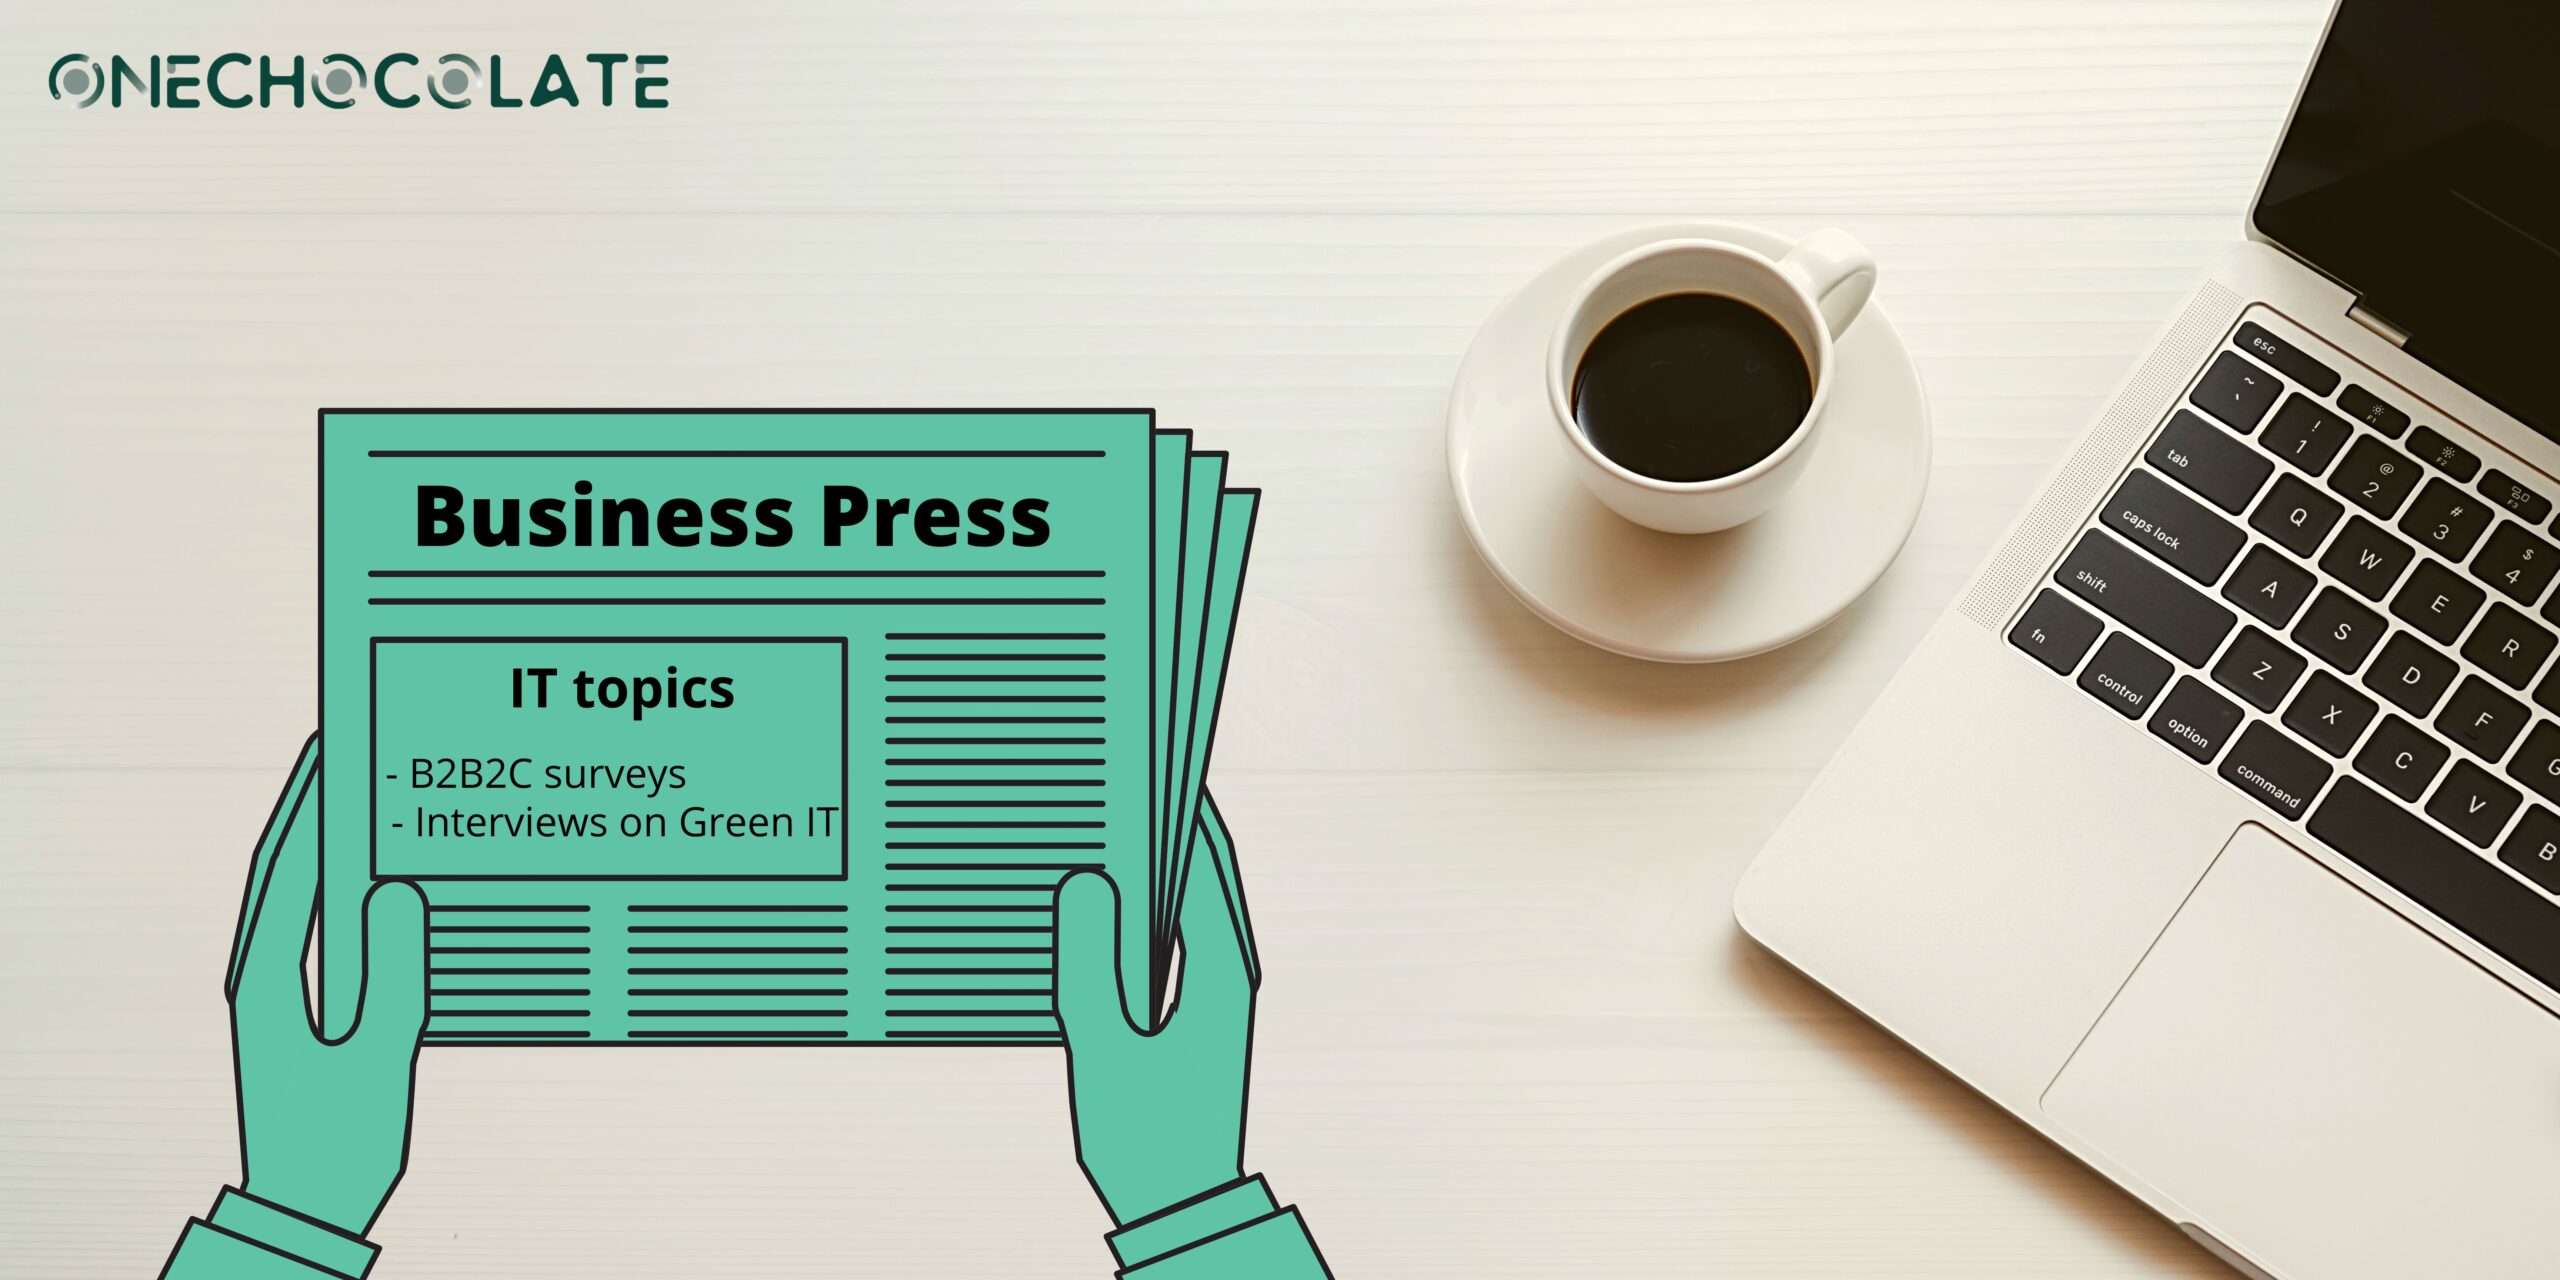 When Technologies and the Business press come together